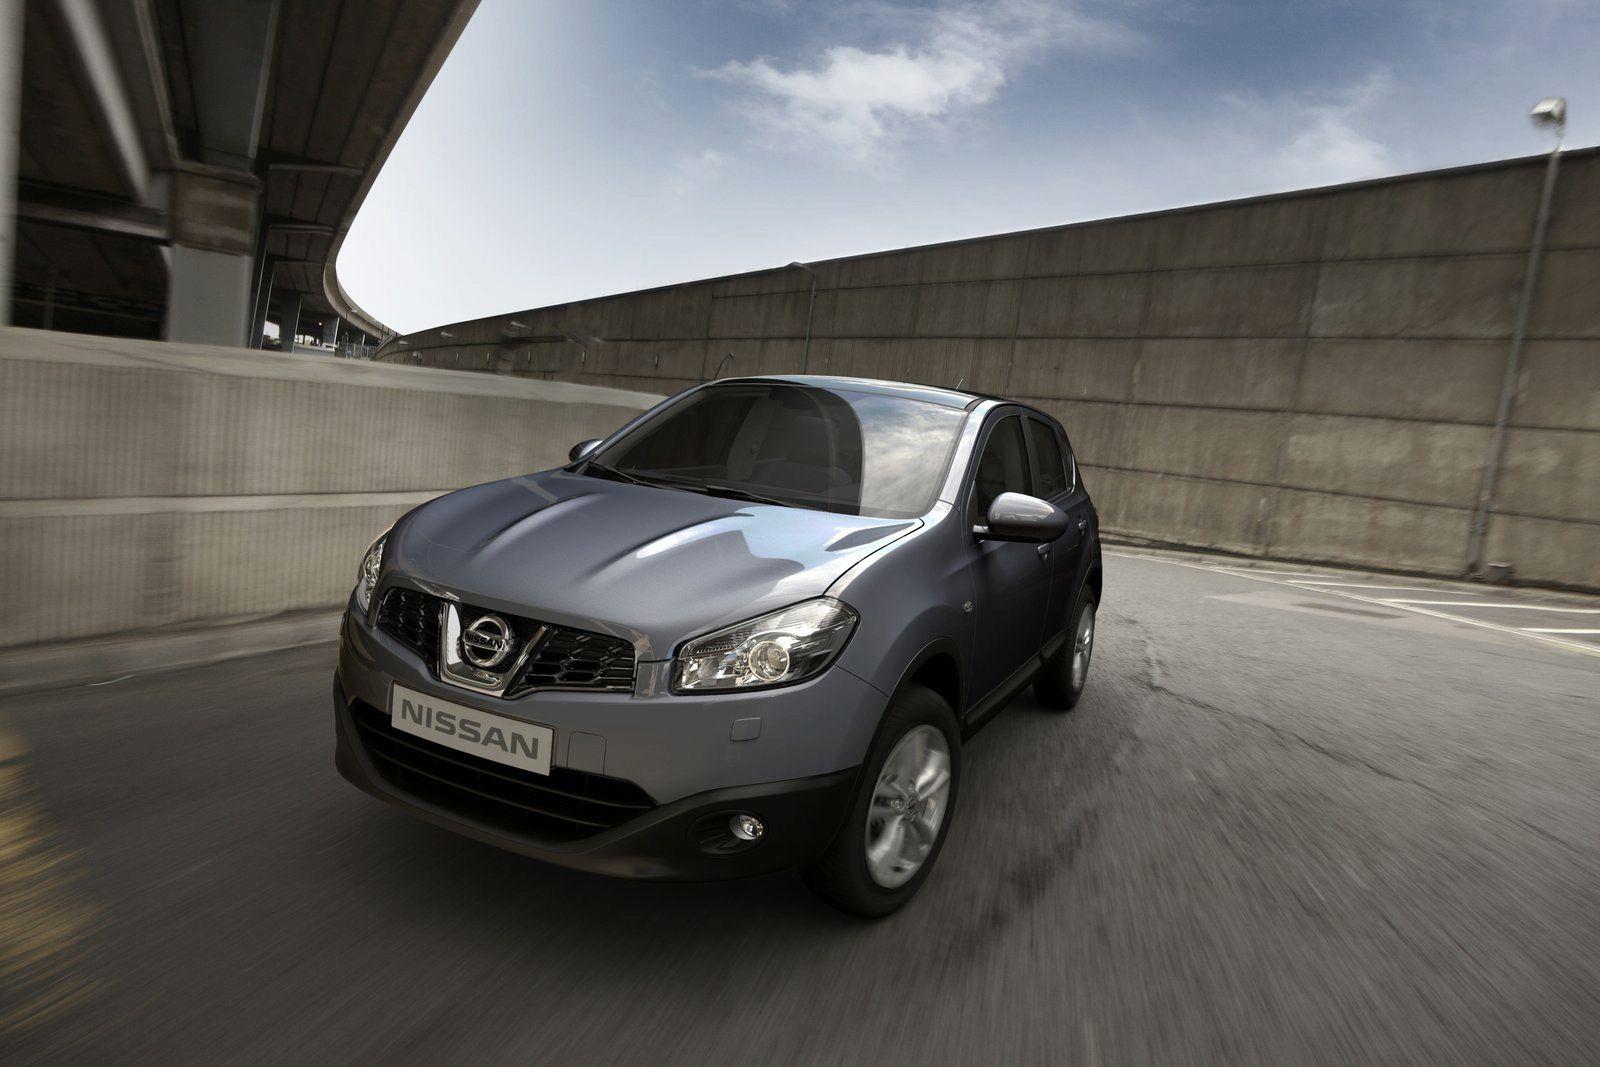 Nissan Qashqai Facelift (UK) 2010 photo 53876 picture at high